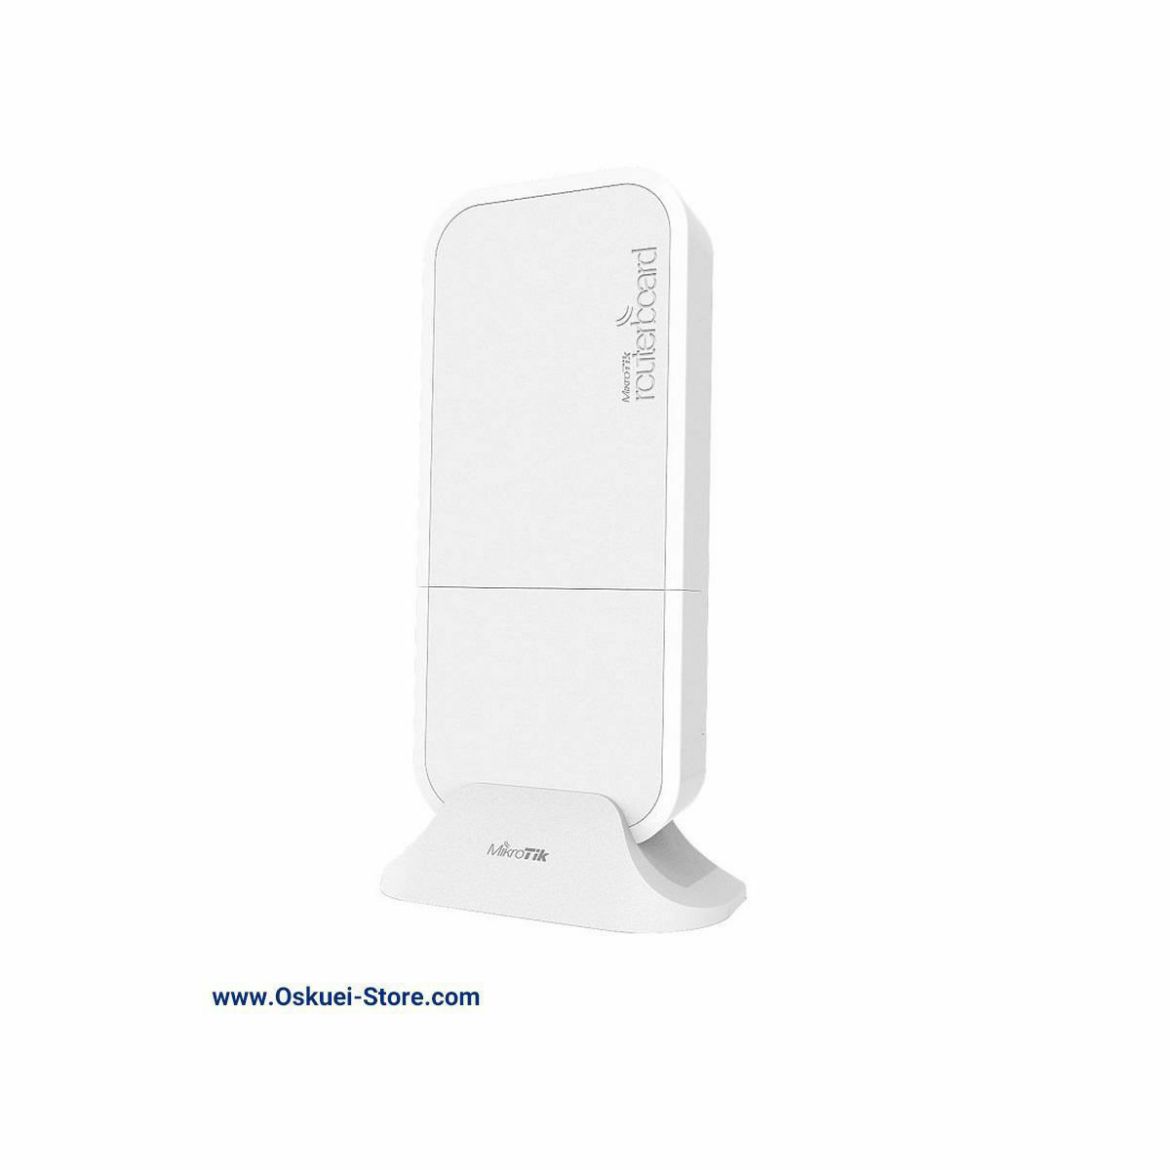 MikroTik RBwAPR-2nD Wireless Router Front